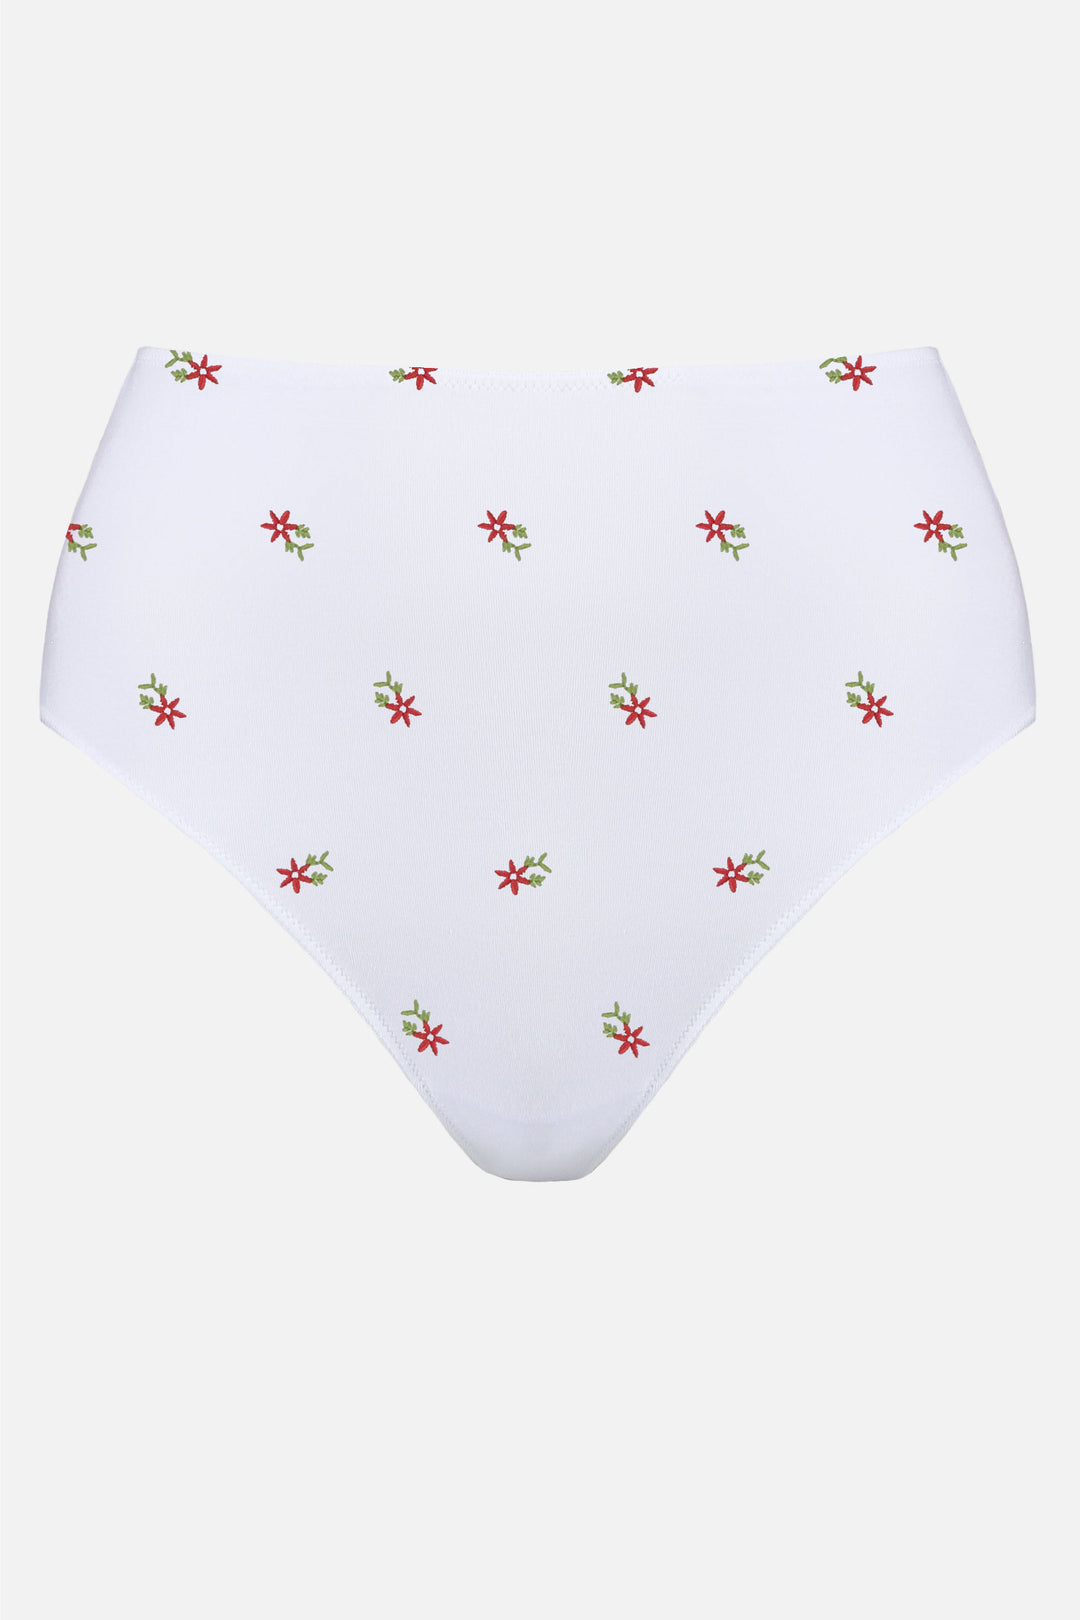 Videris Lingerie high waist knicker in white TENCEL™ cut to follow the natural curve of your hips